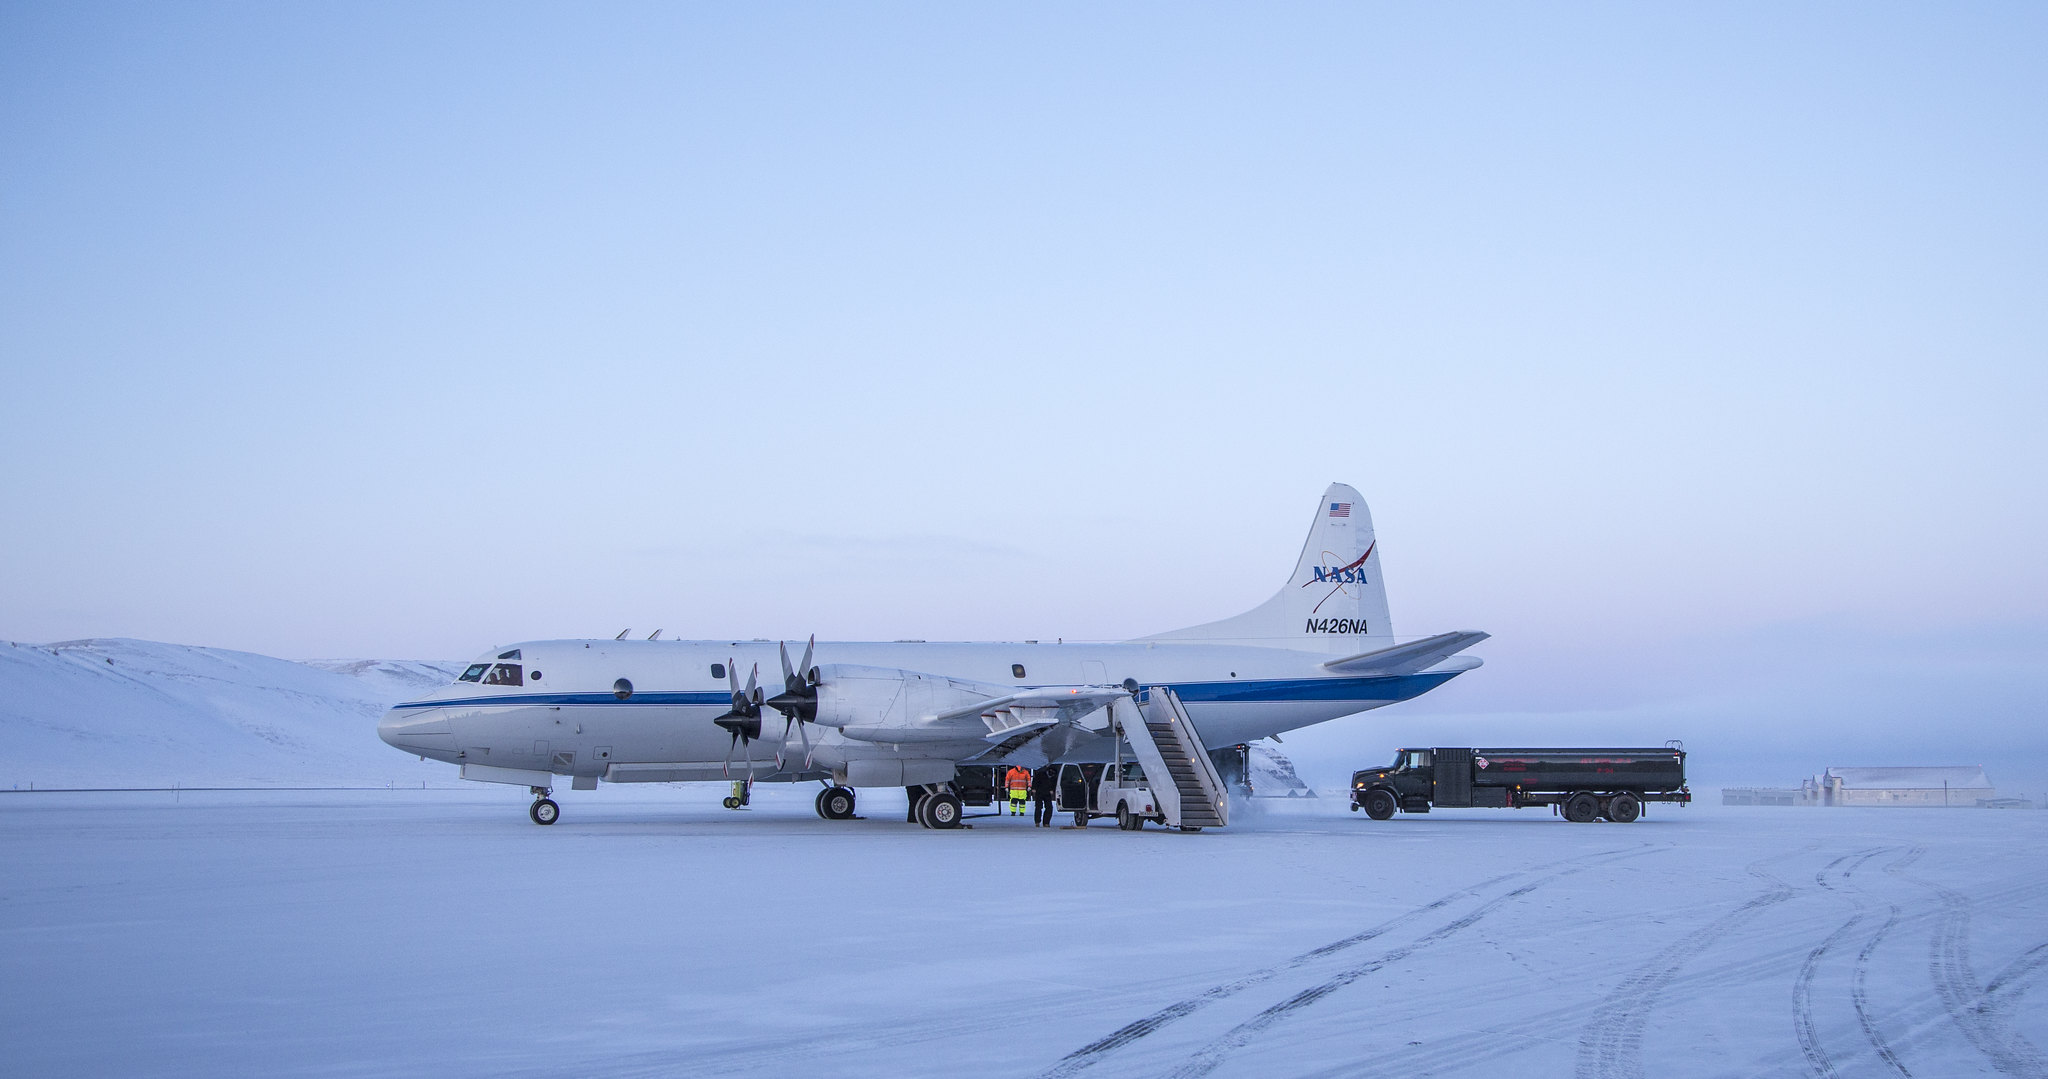 The P-3 aircraft, a white plane with blue strip down the side, sits on an snow-covered landscape.